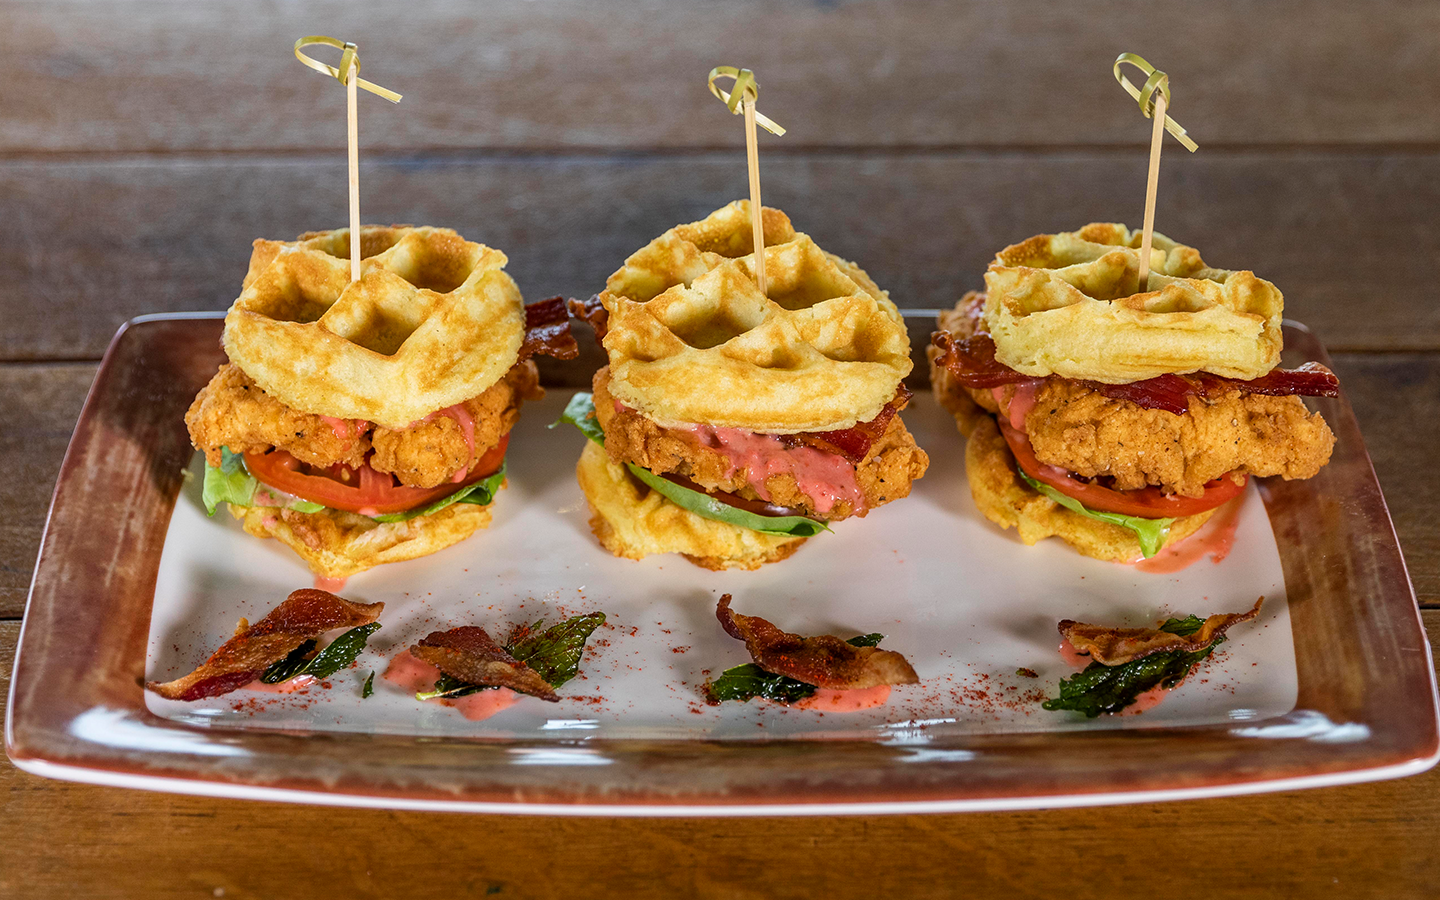 Chicken & Waffle Sliders from Toothsome Chocolate Emporium & Savory Feast Kitchen